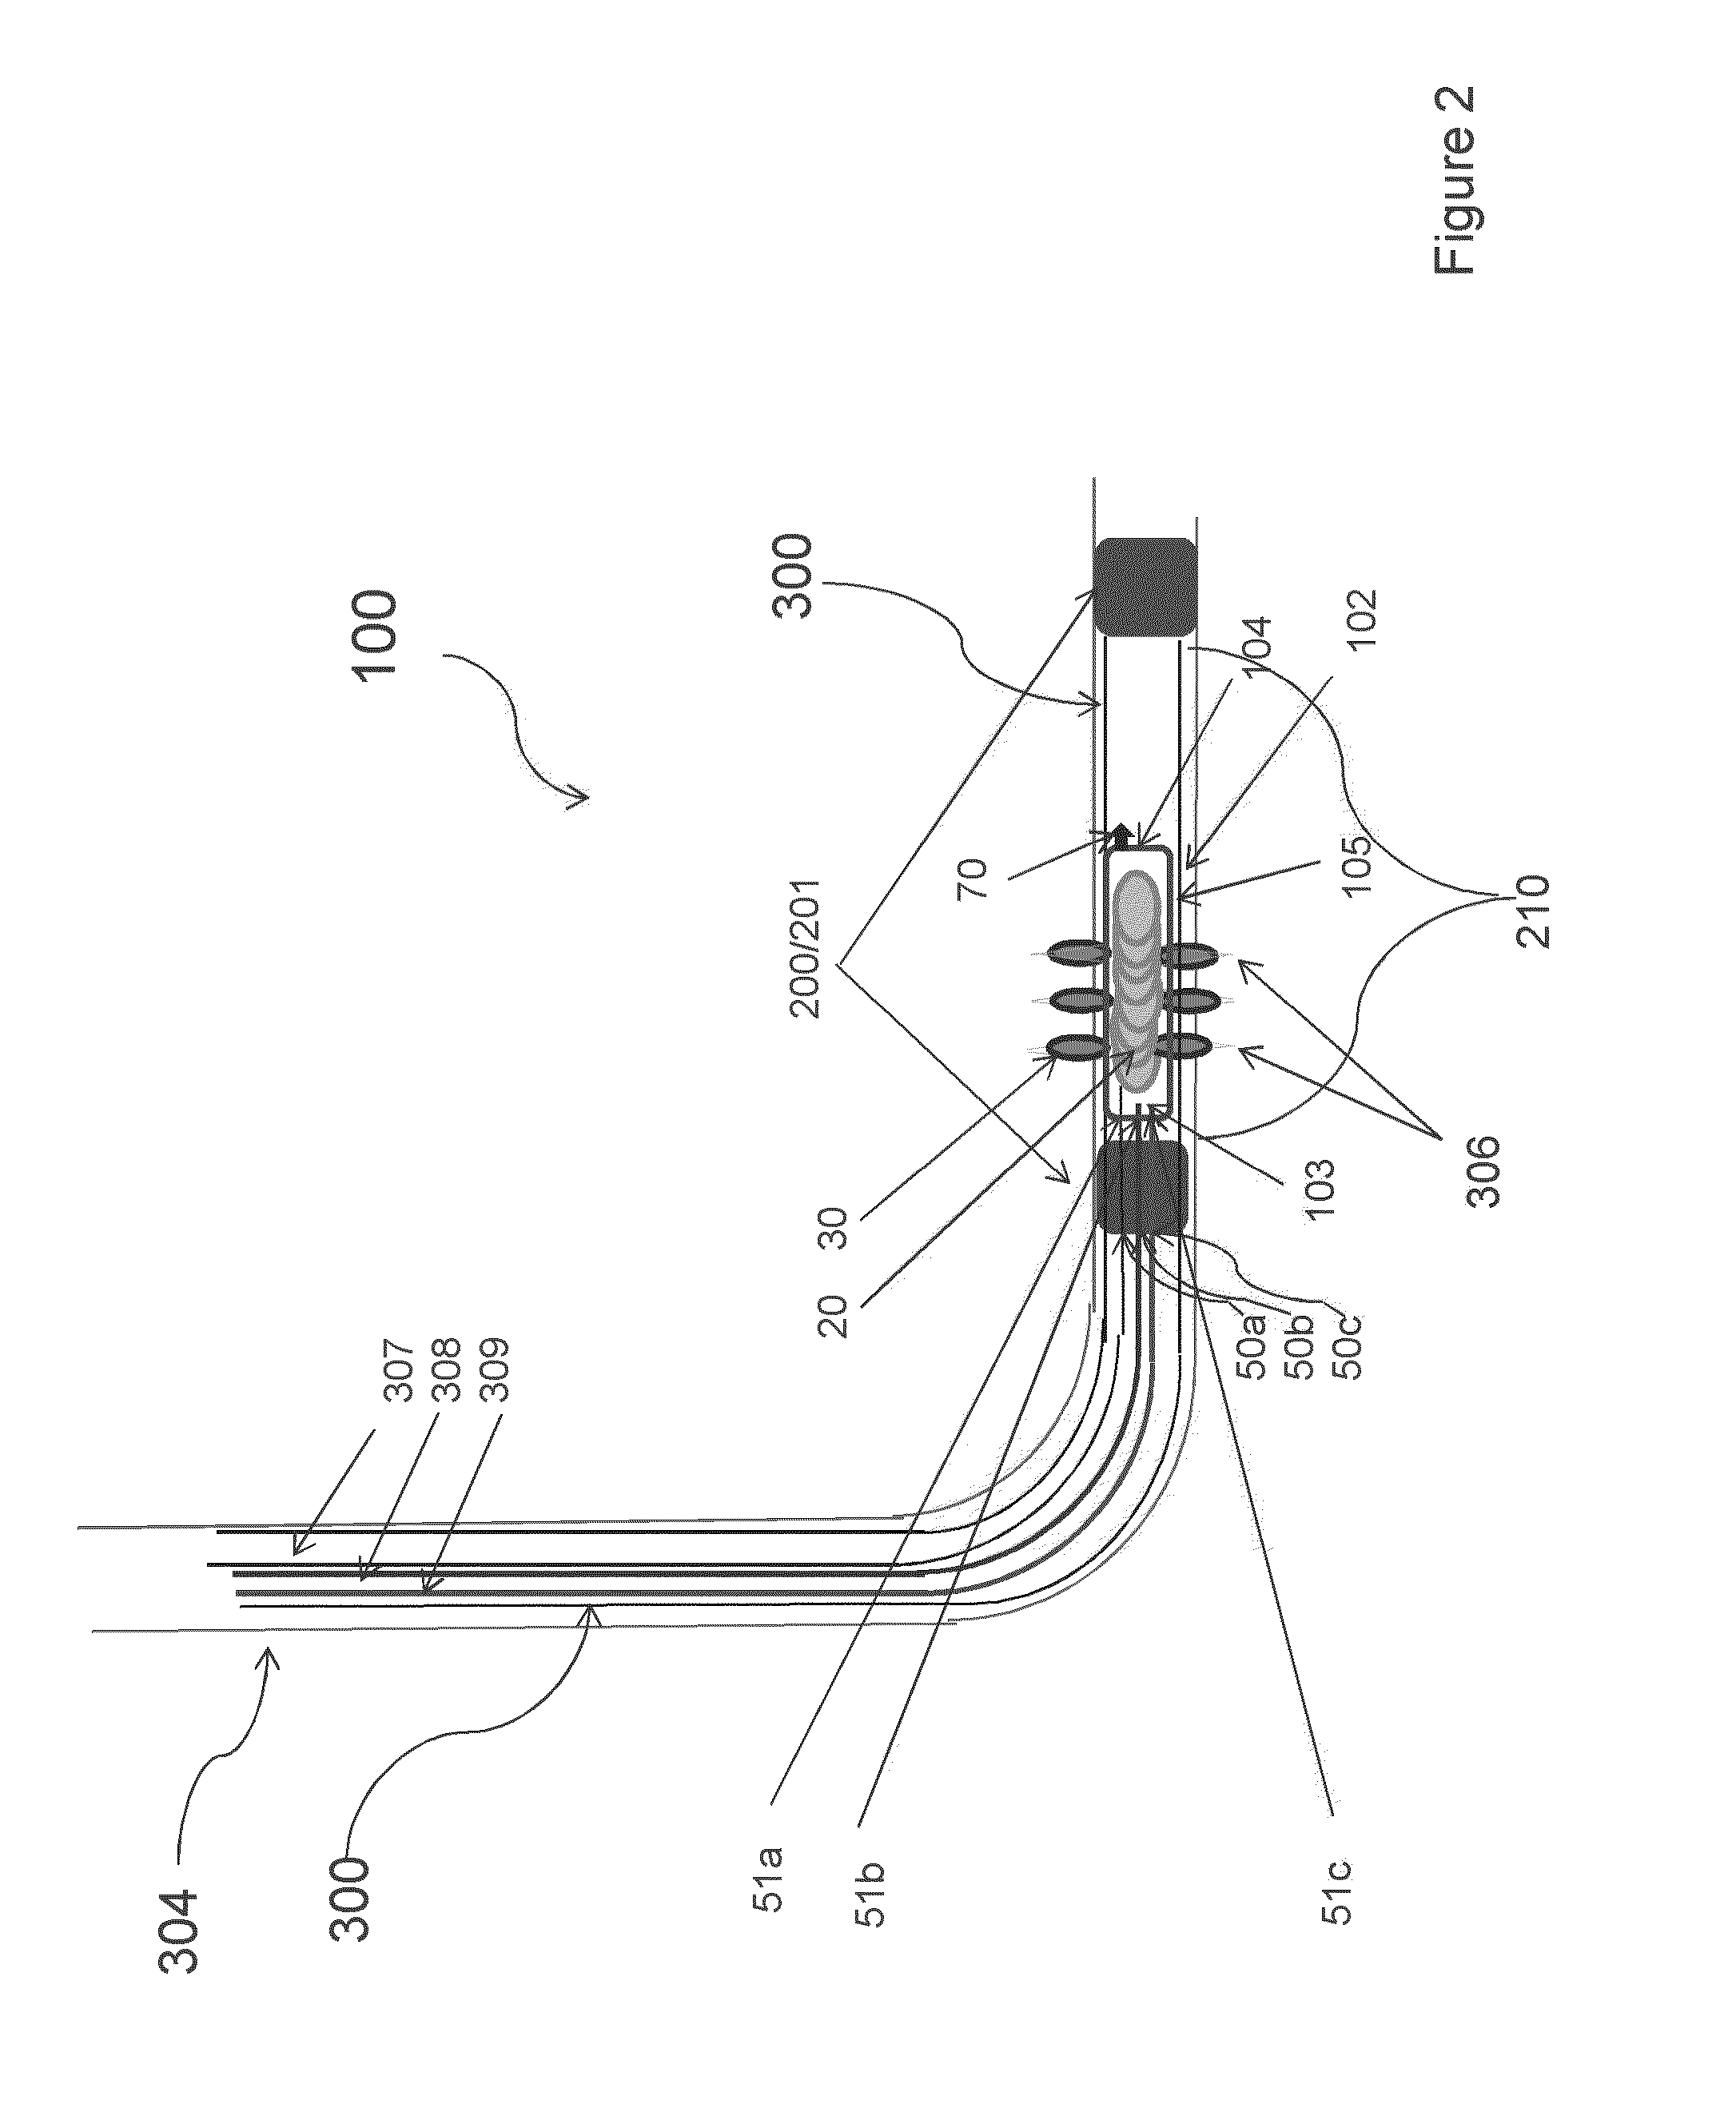 Pulse detonation tool, method and system for formation fracturing